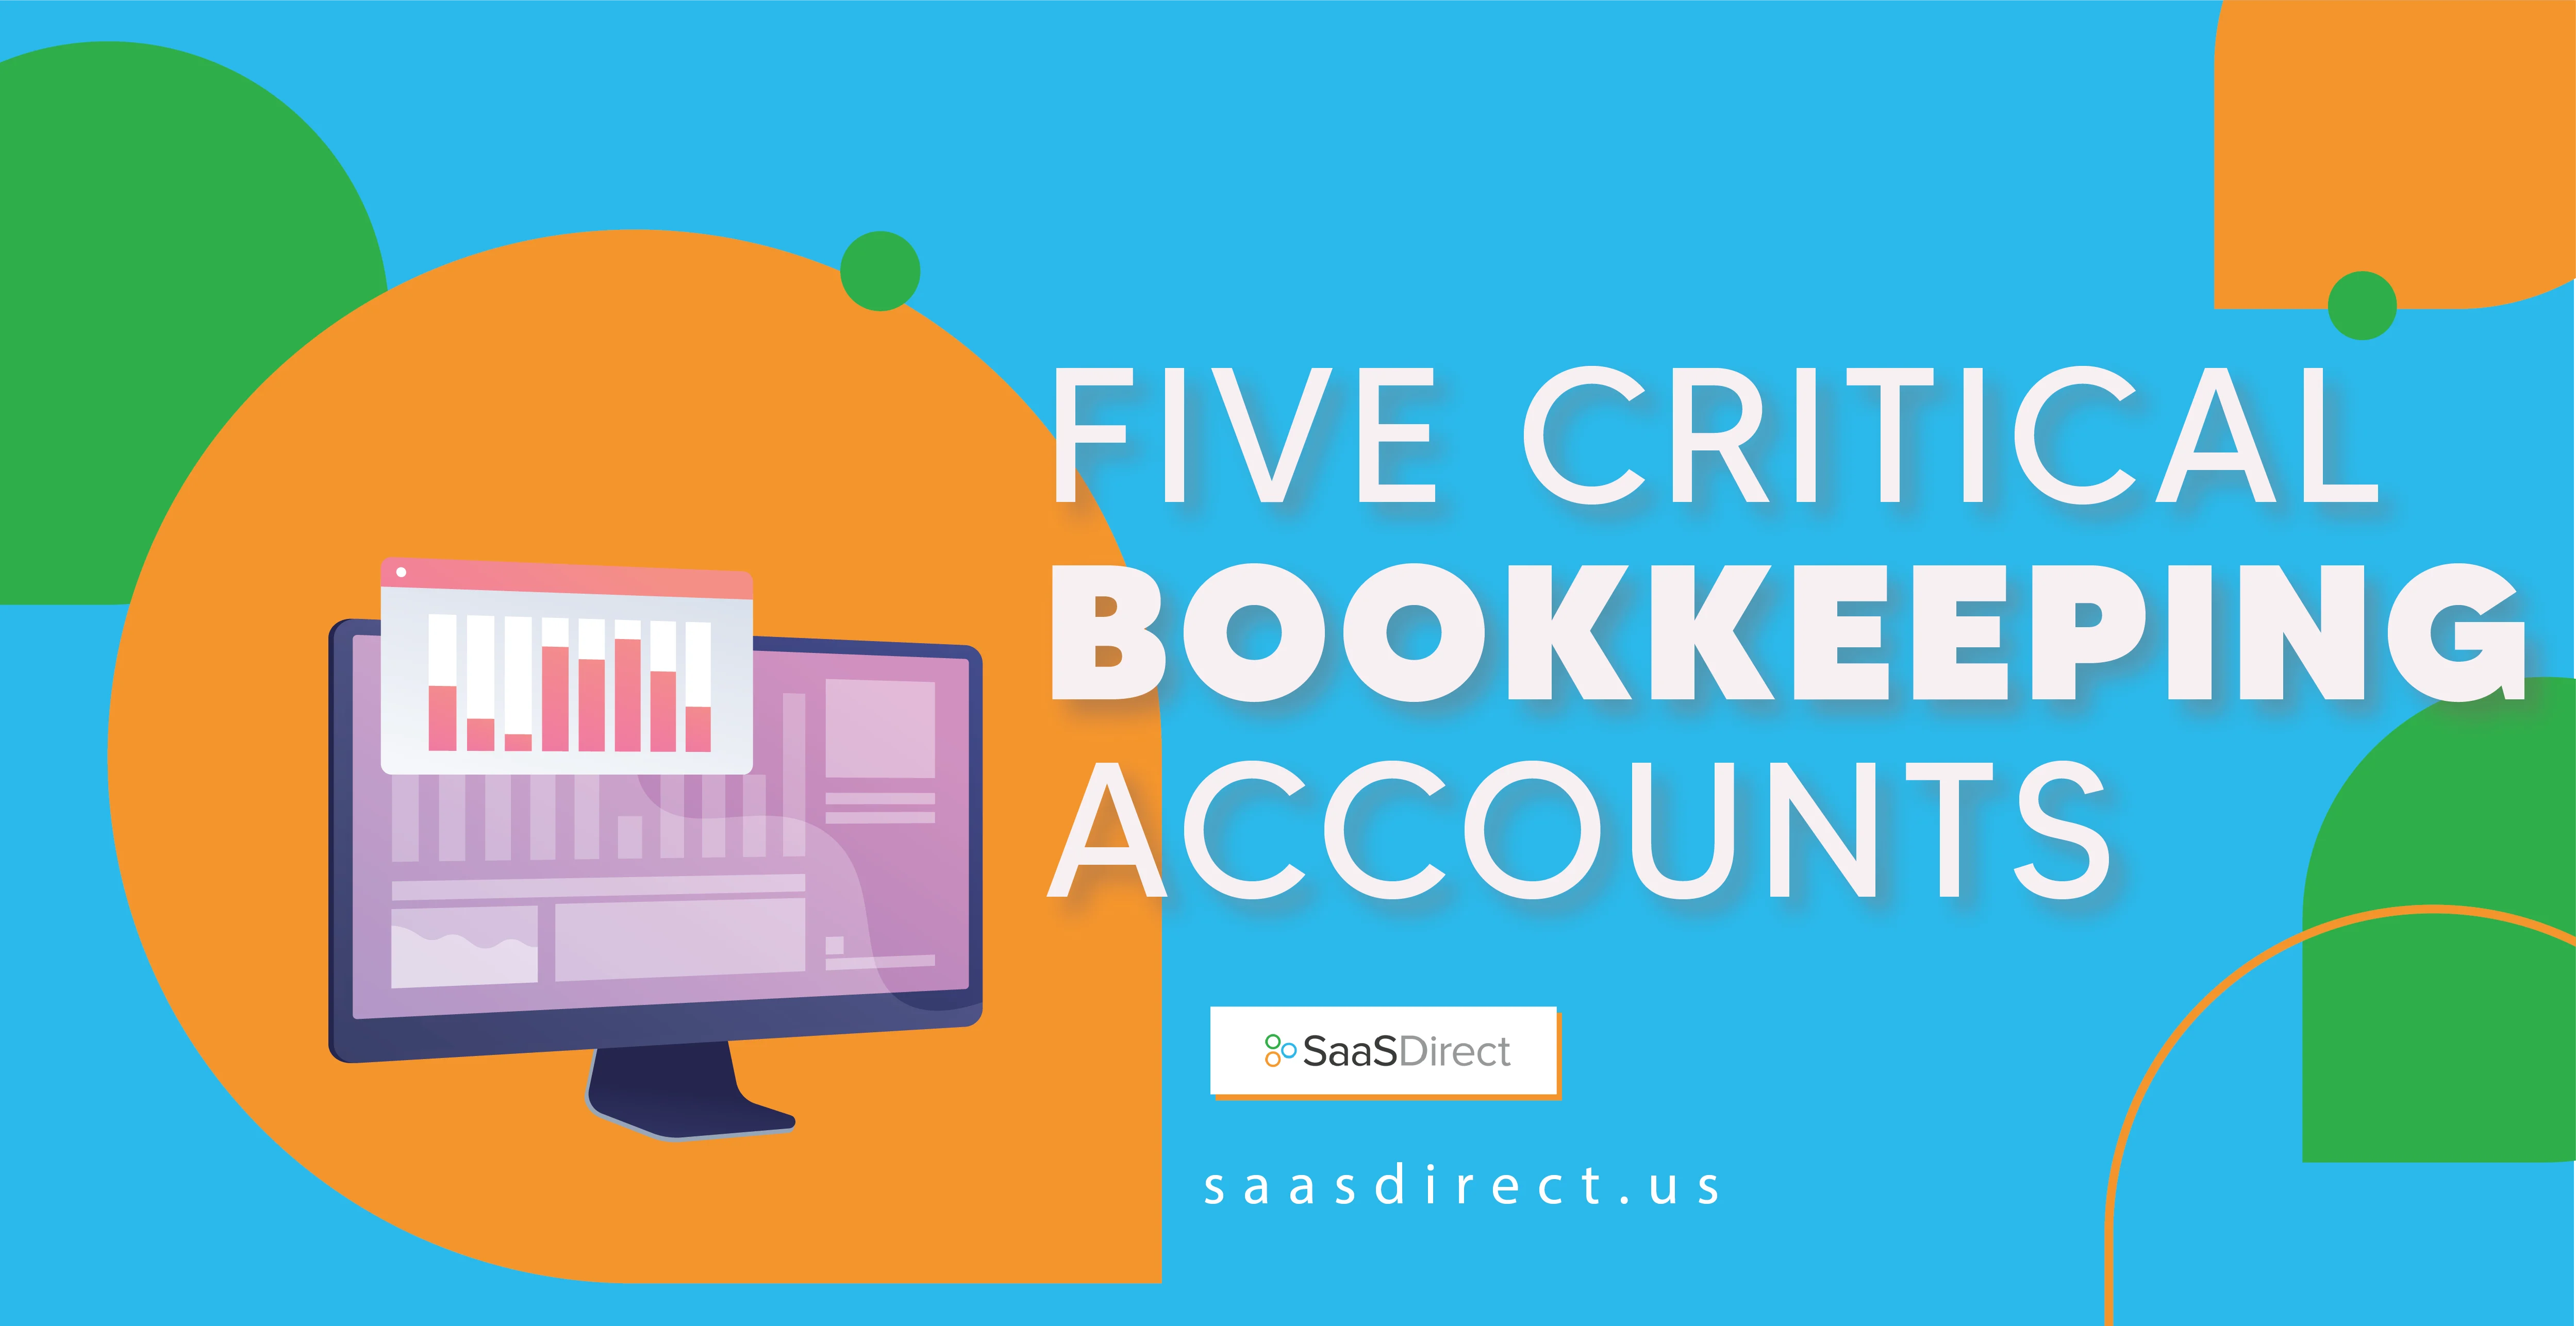 5 Critical Bookkeeping Accounts and How to Use Them